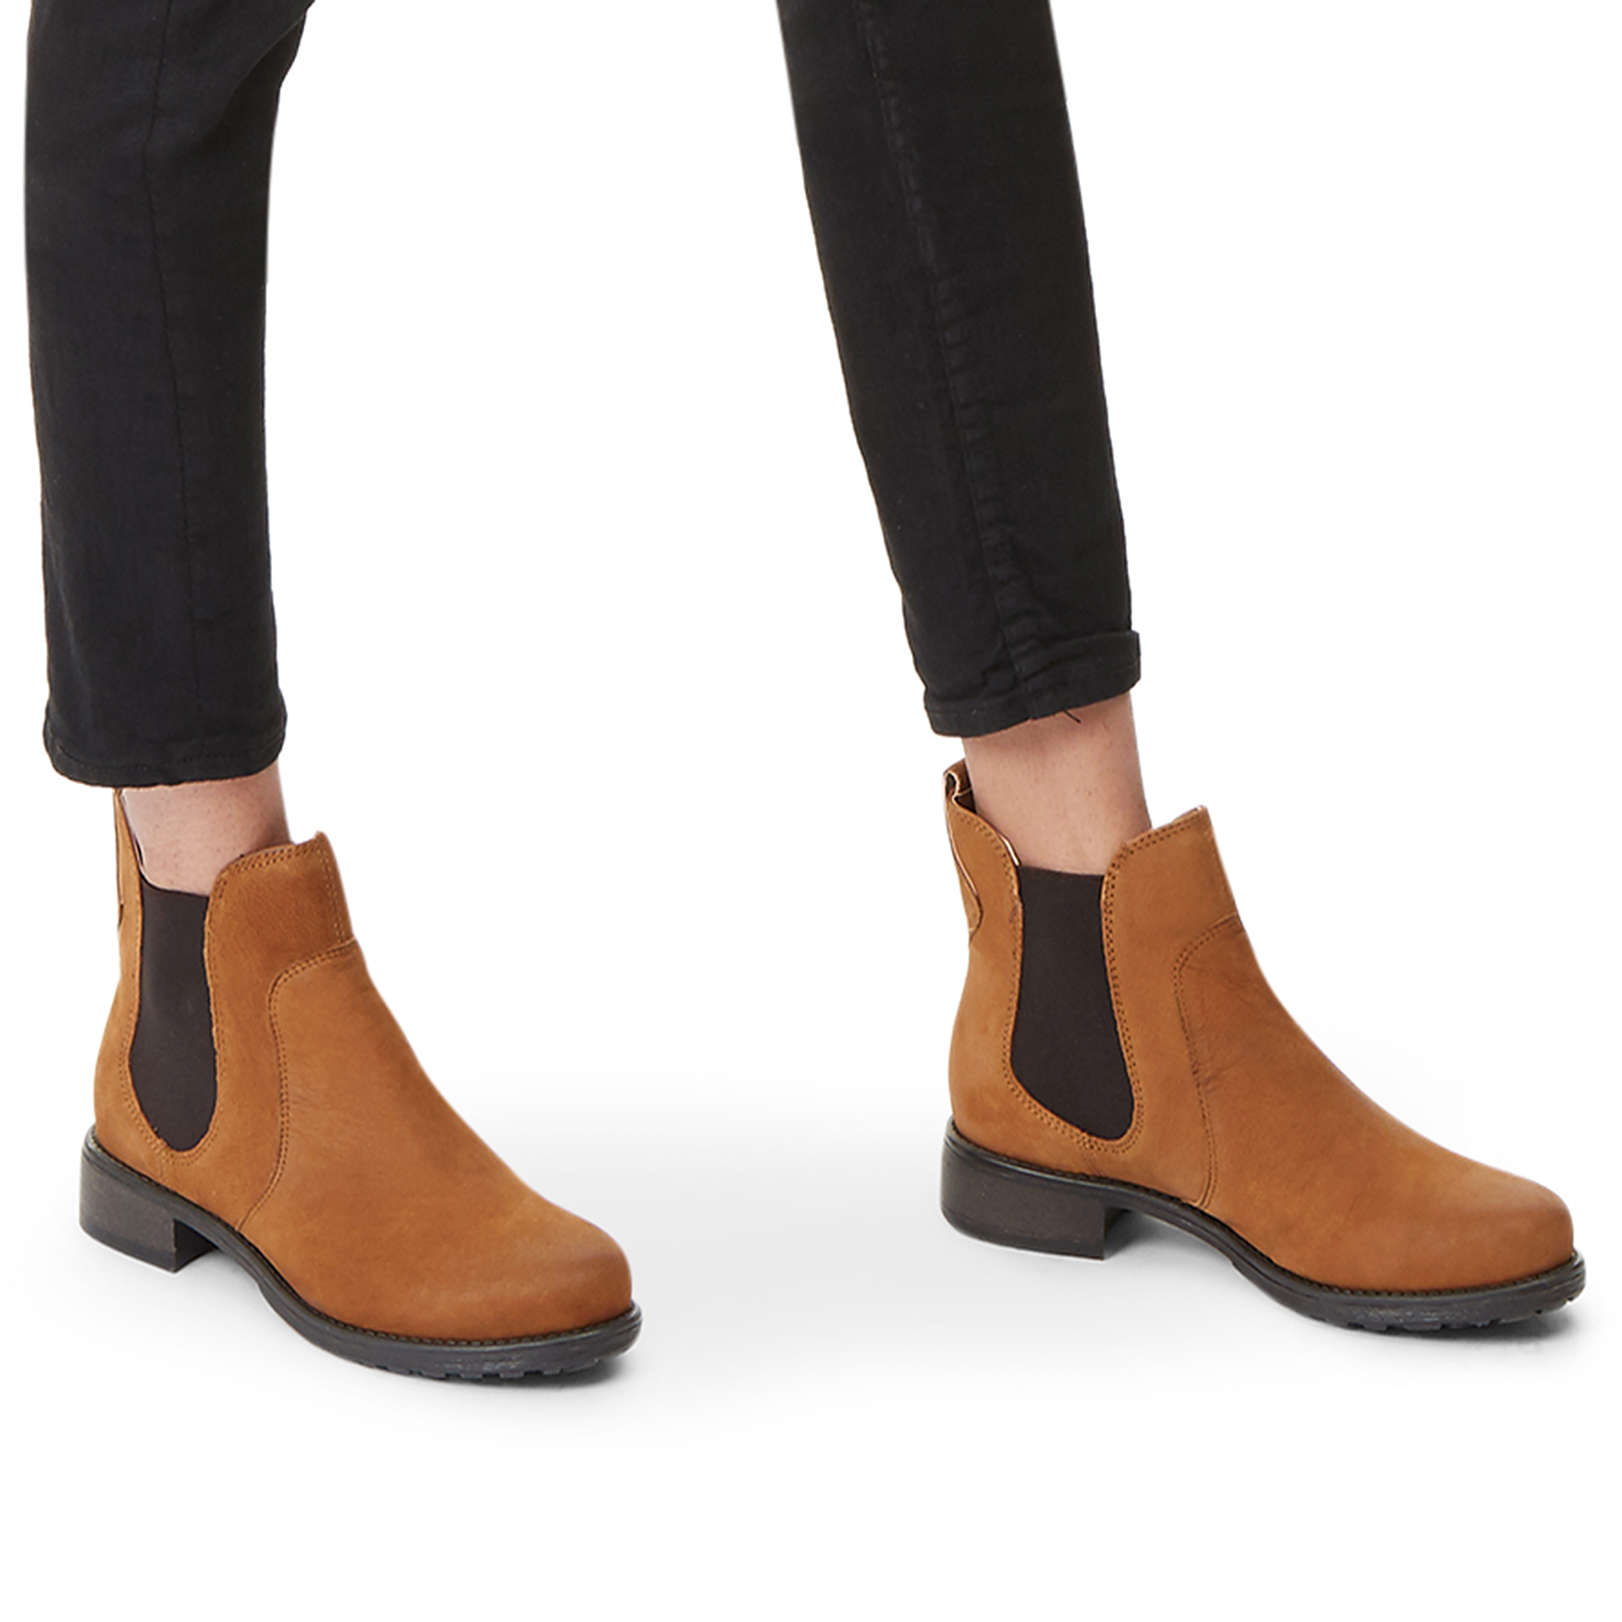 SOLID - CARVELA Ankle Boots